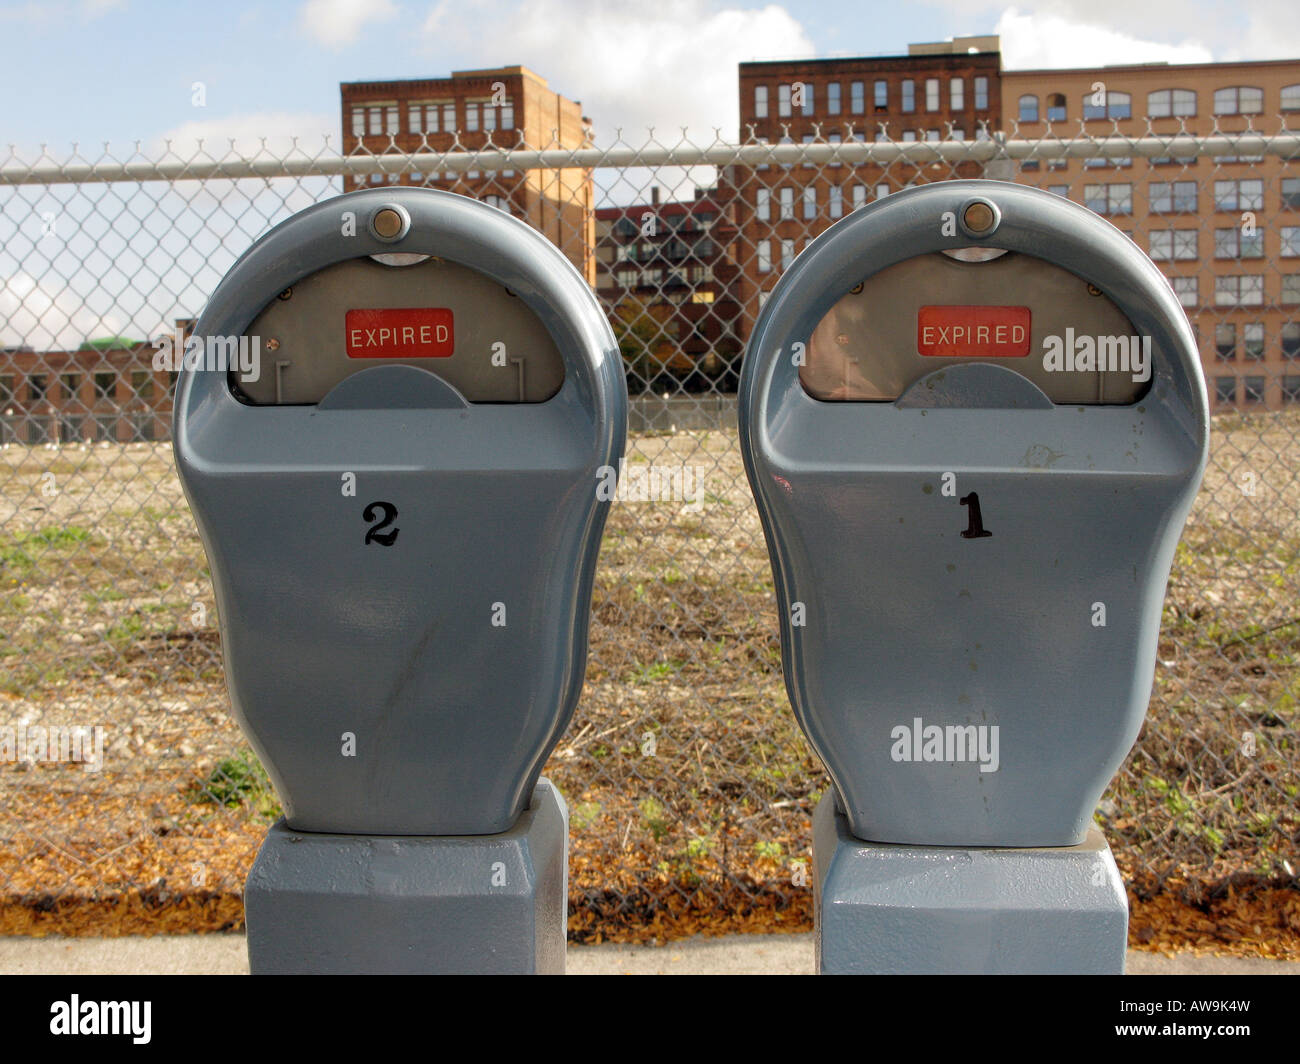 Expired parking meters. Stock Photo